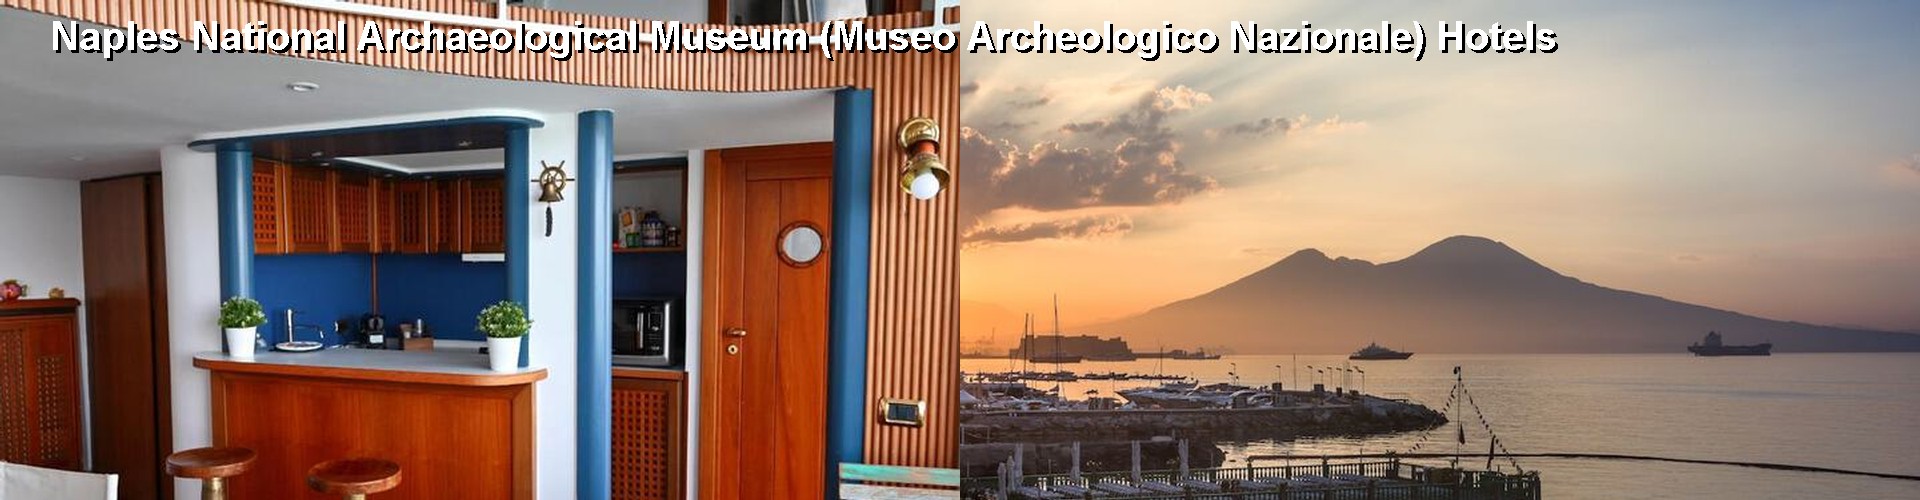 5 Best Hotels near Naples National Archaeological Museum (Museo Archeologico Nazionale)